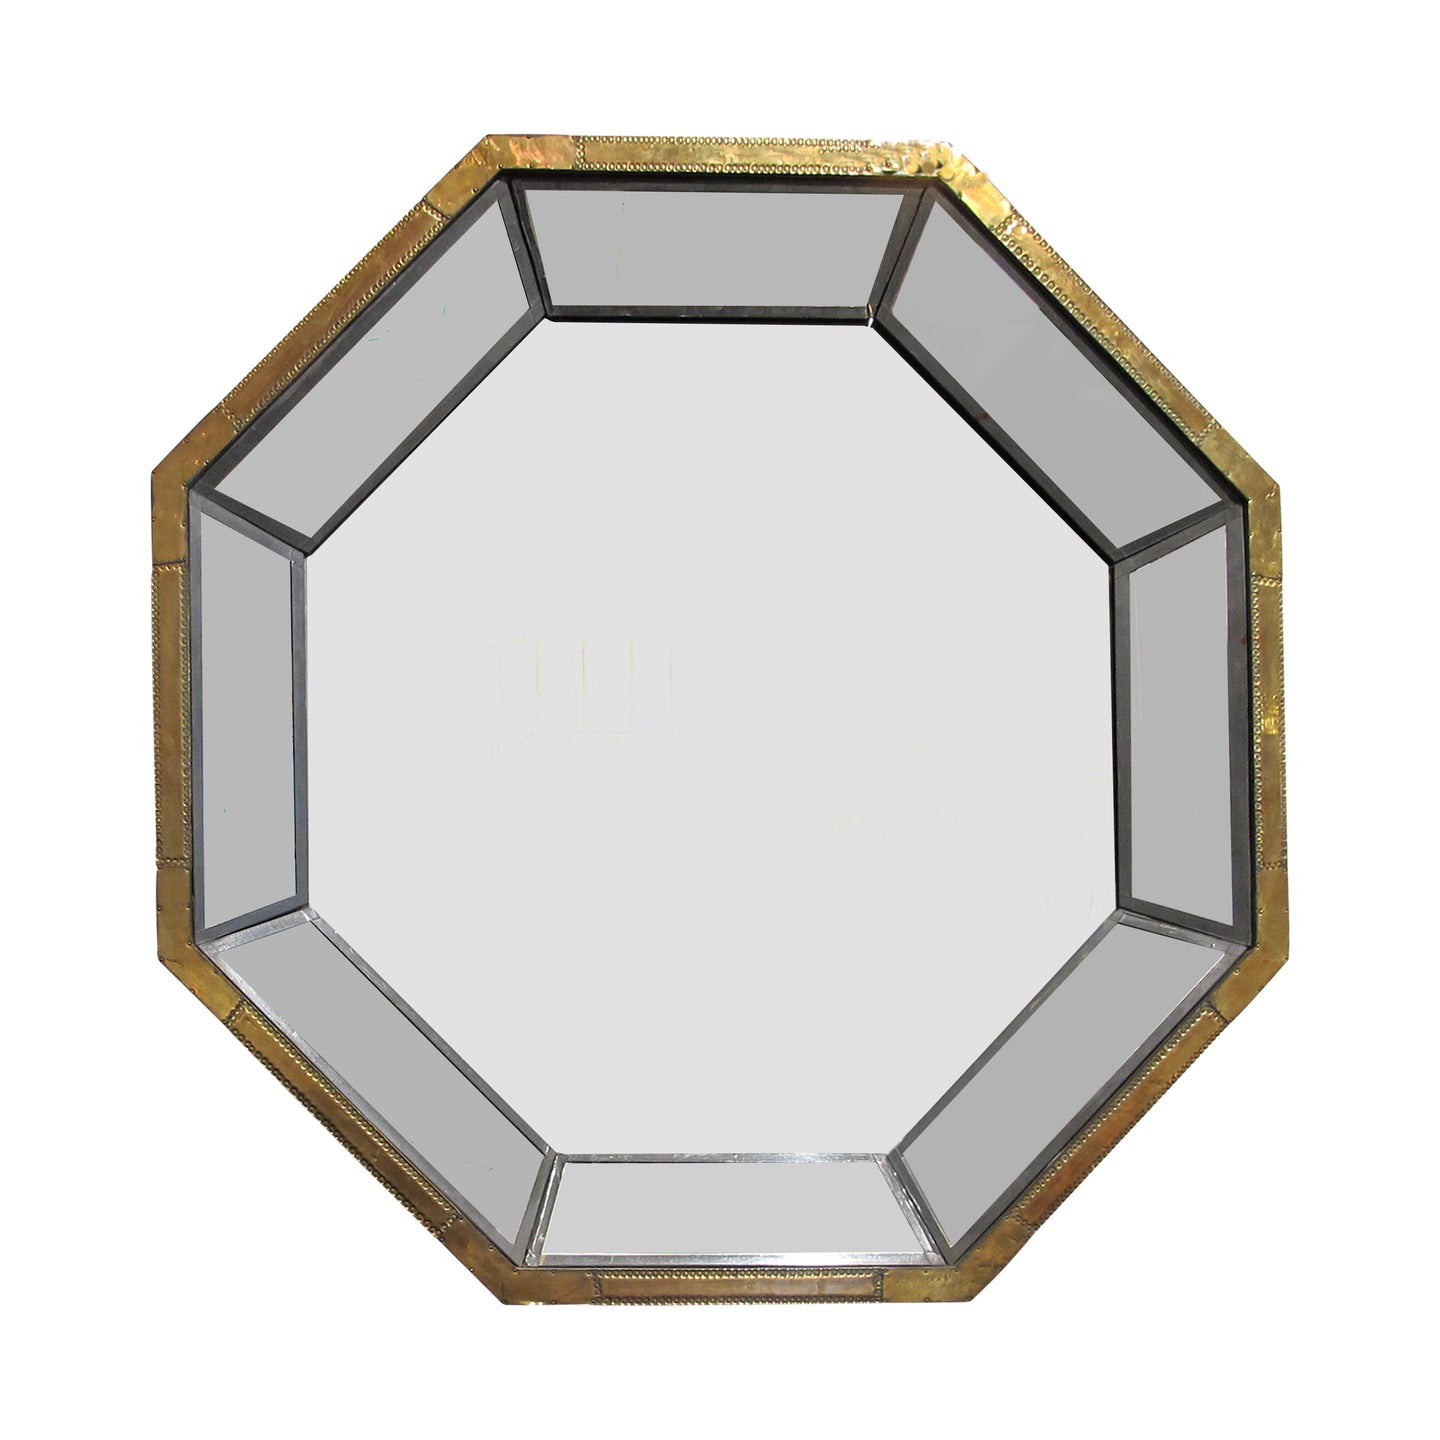 1970s Large Octagonal Multi Sectional Mirror By Rodolfo Dubarry, Spanish